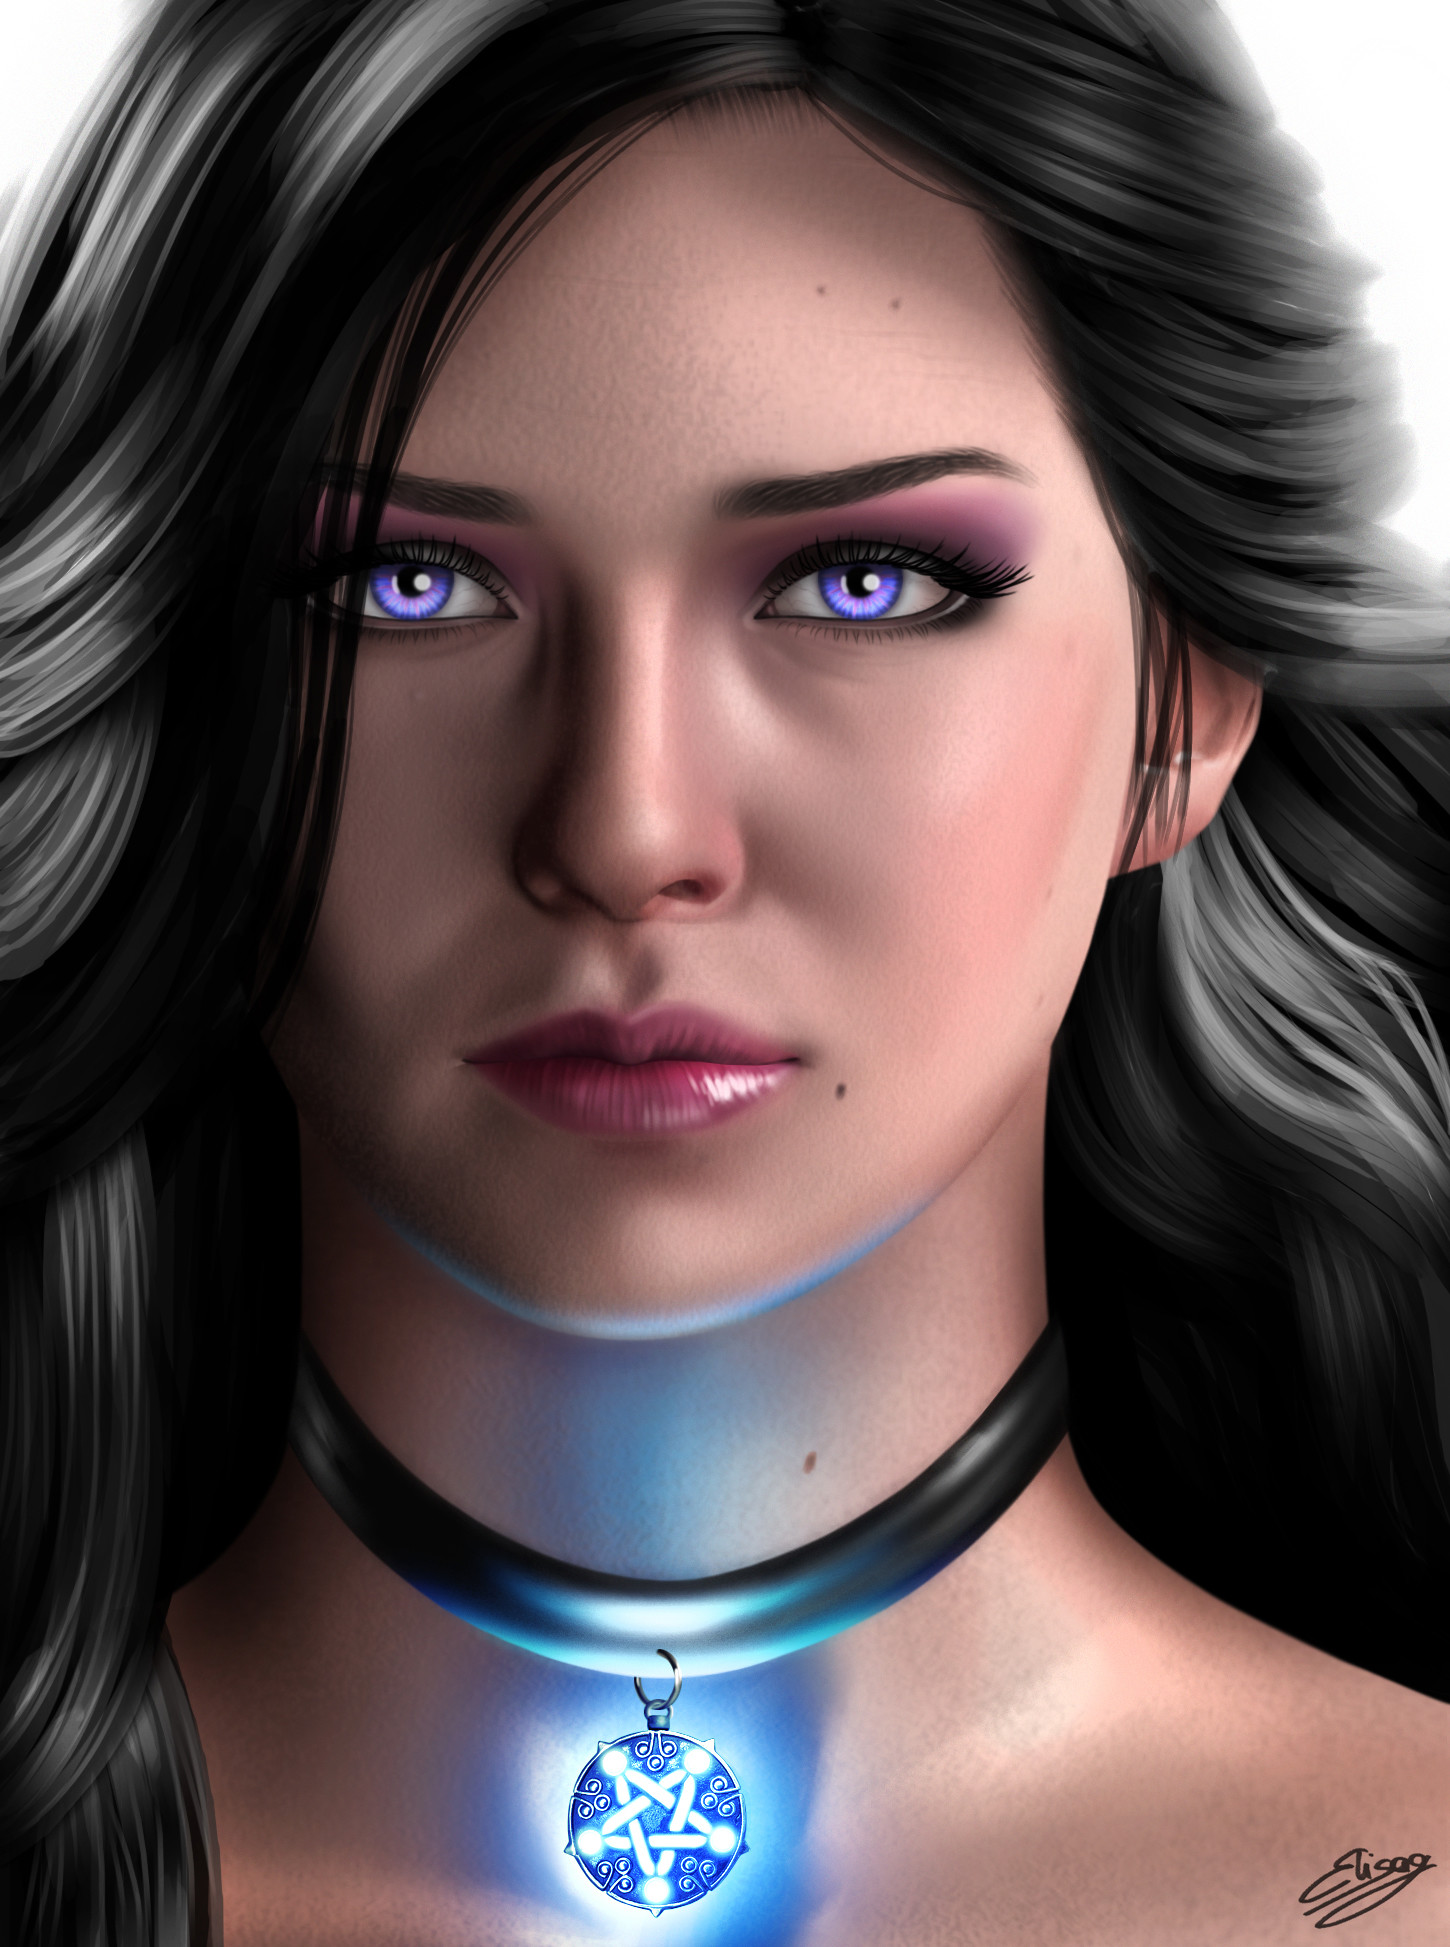 Yennefer of Vengerberg from The Witcher